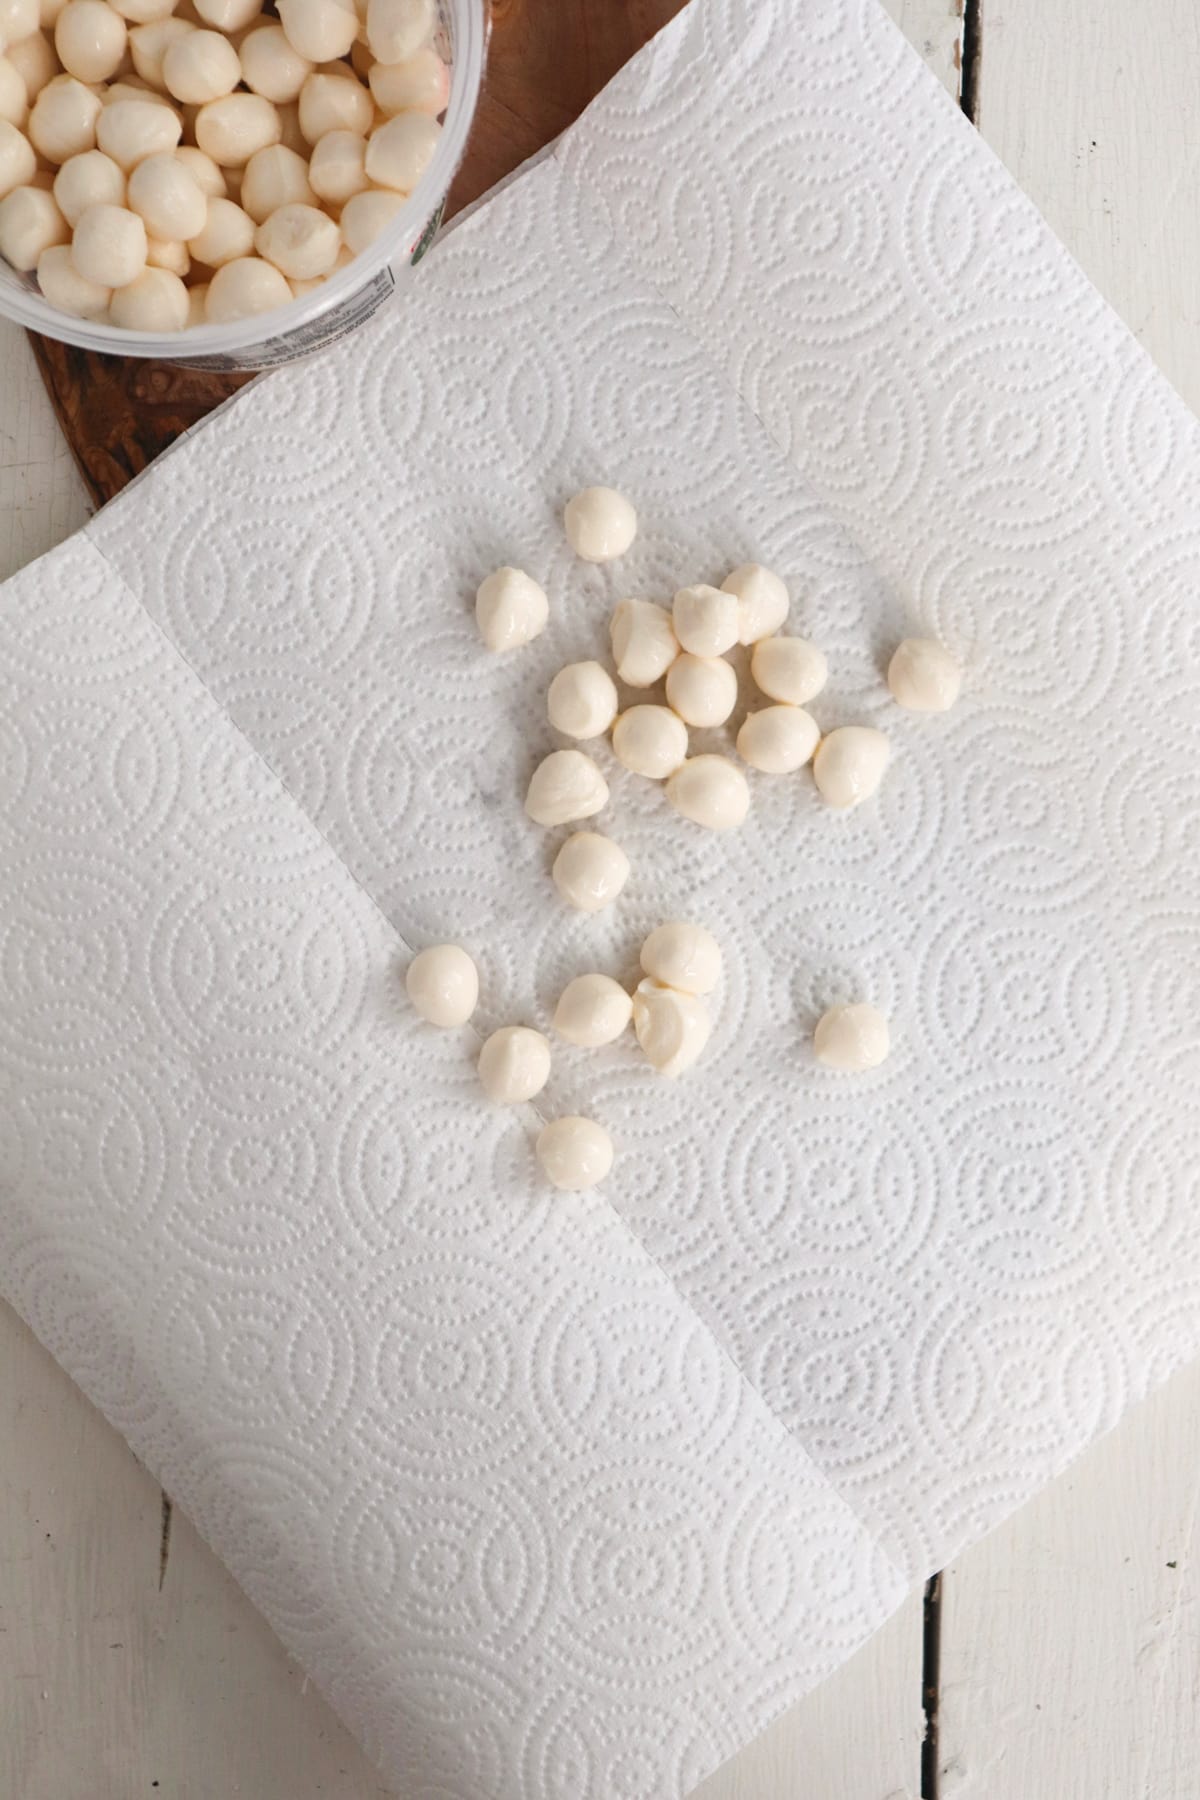 mozzarella balls that are being dried on a paper towel.